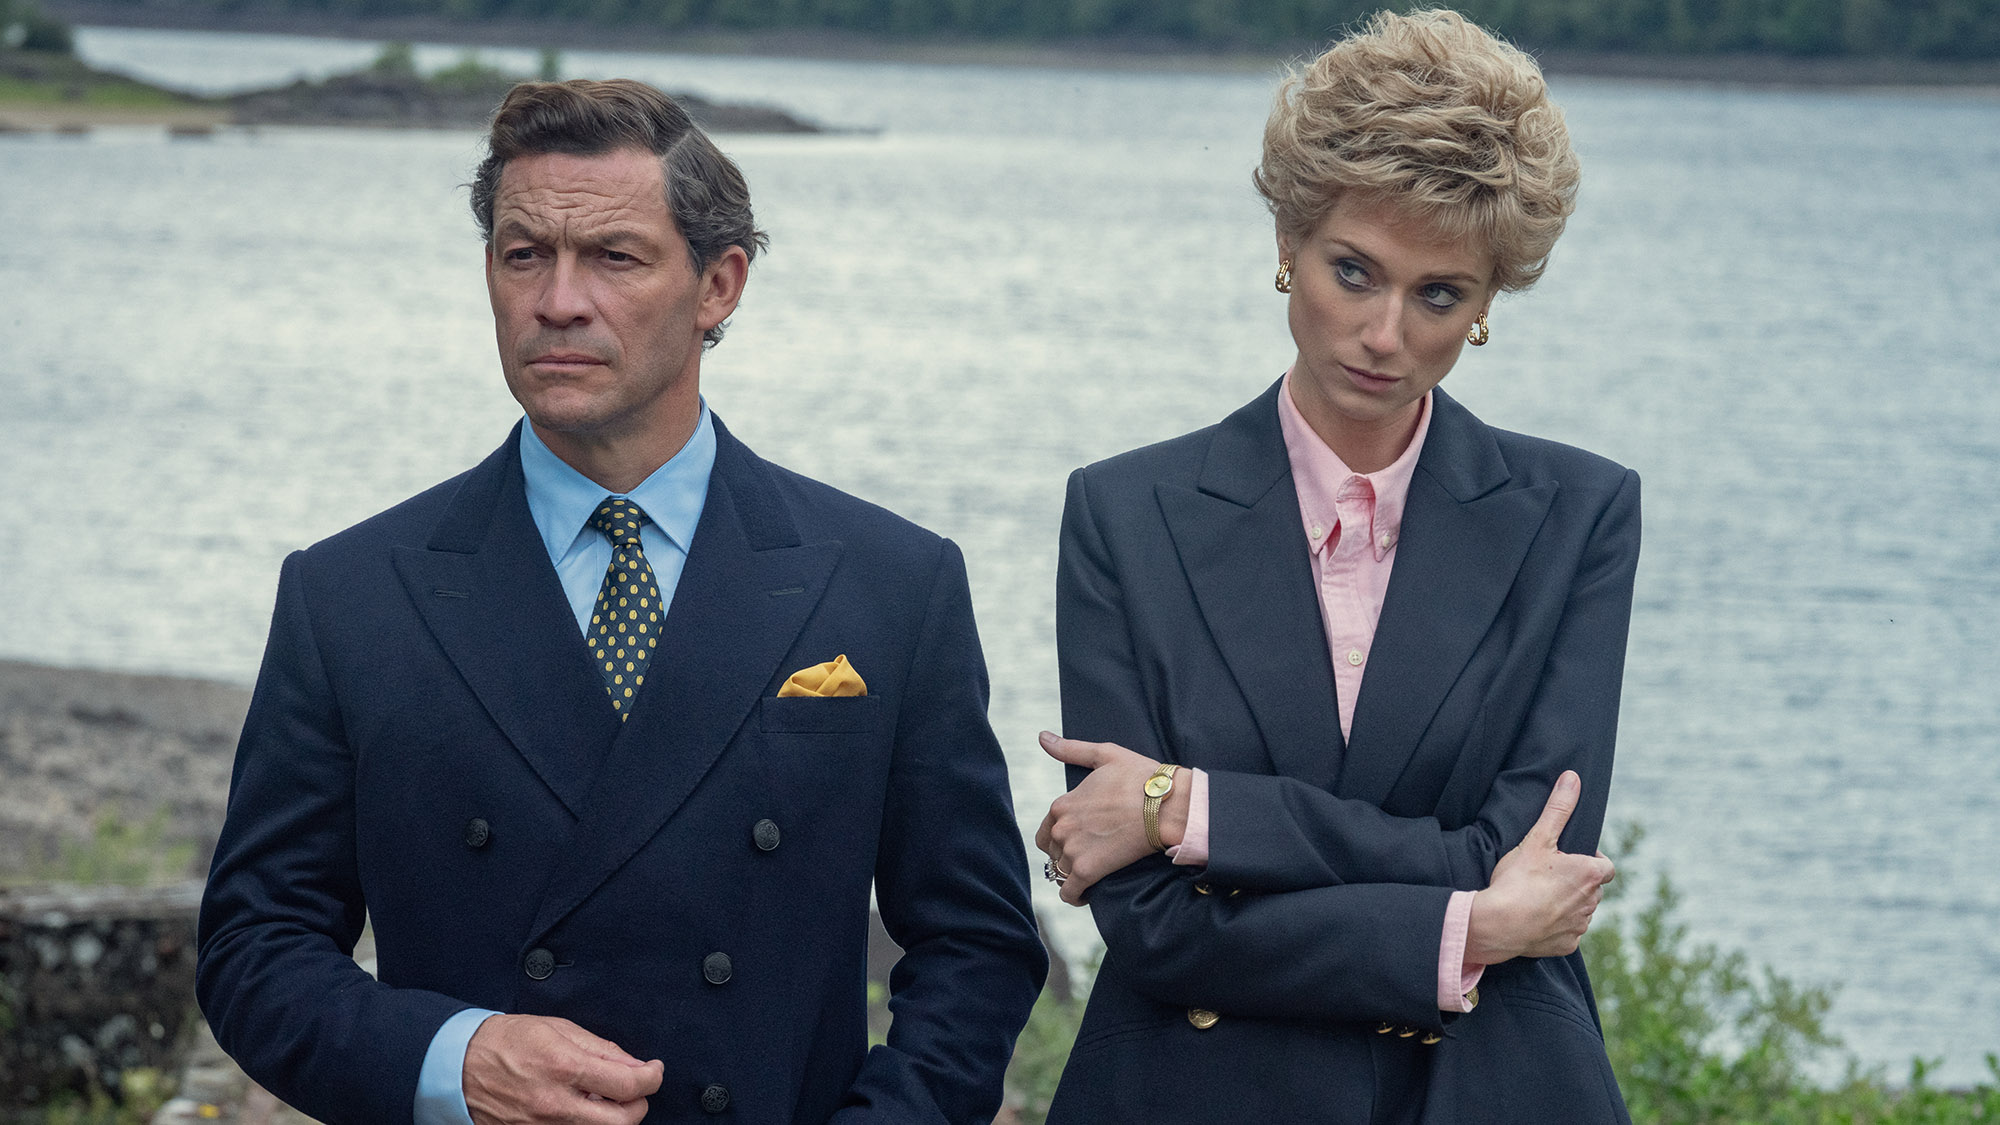 (from left to right) Dominic West as Charles and Elizabeth Debicki as Diana in Season 5 of The Crown